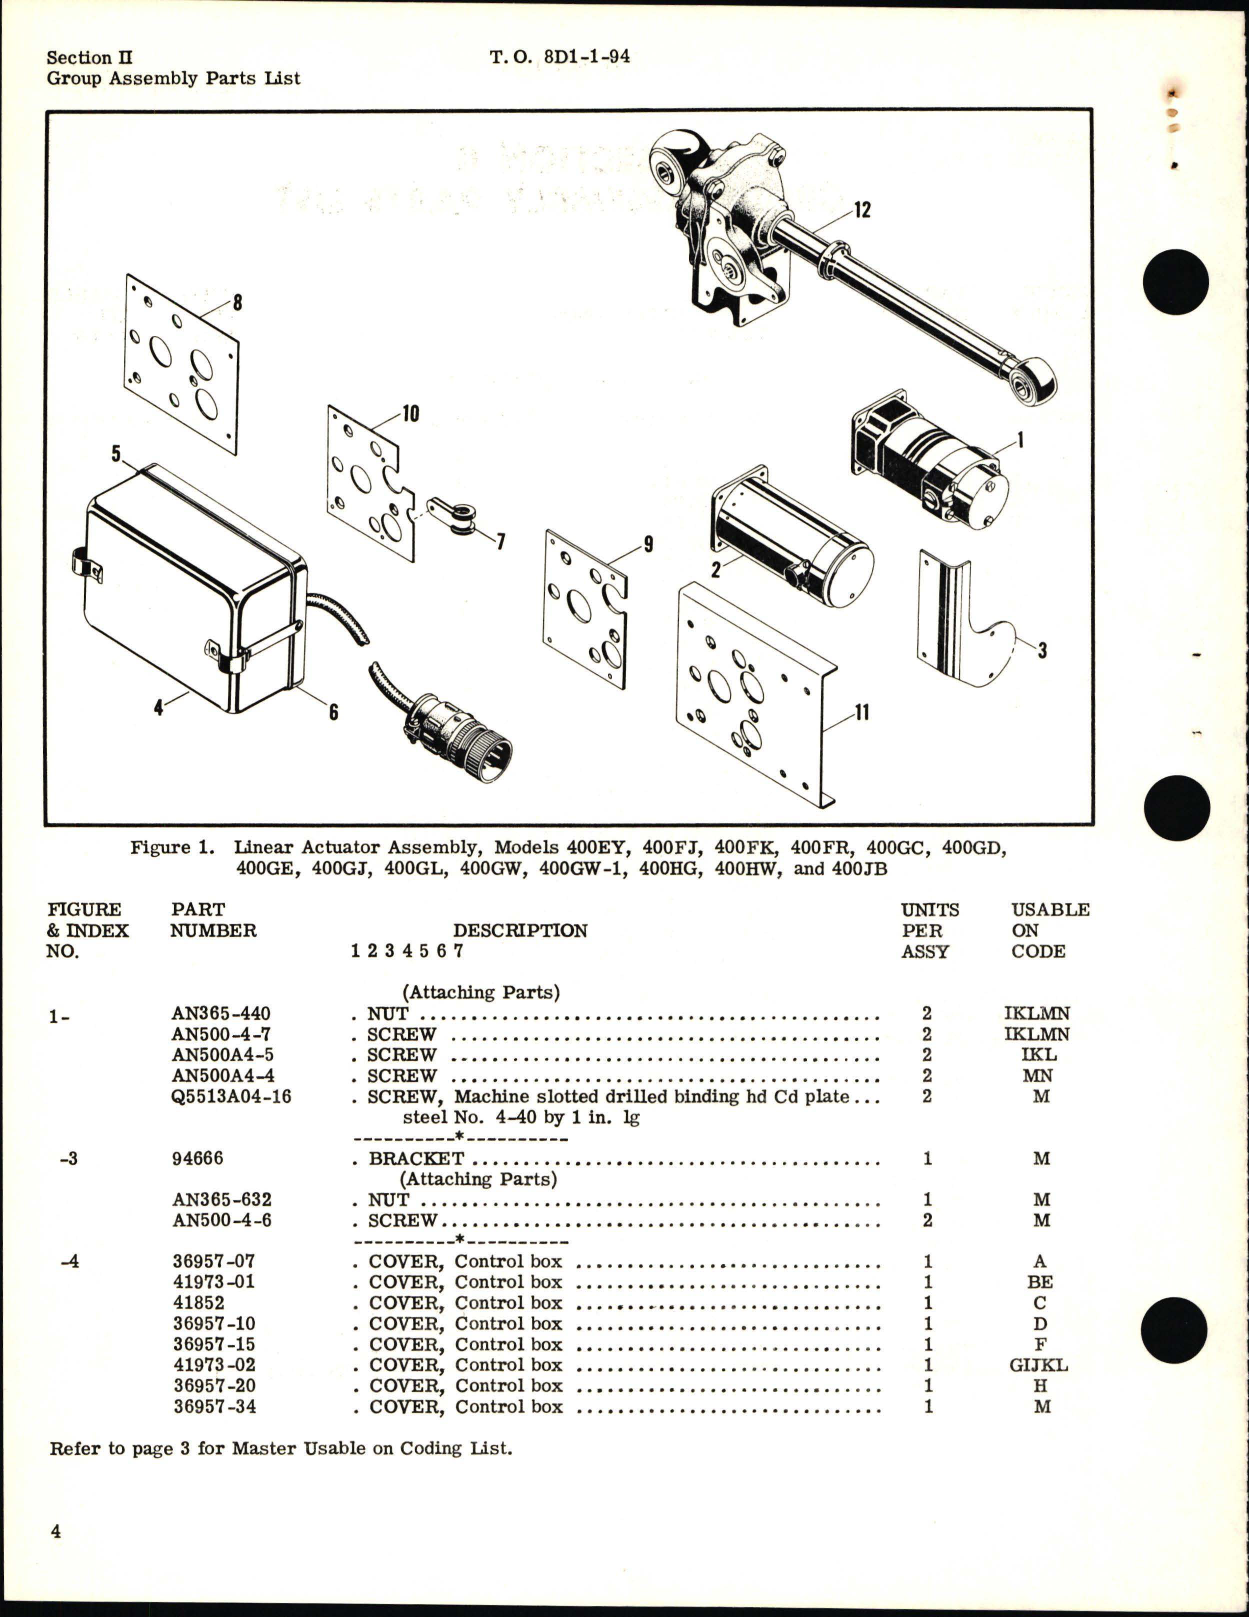 Sample page 8 from AirCorps Library document: Illustrated Parts Breakdown for Linear Actuator Assembly Model 400 Series